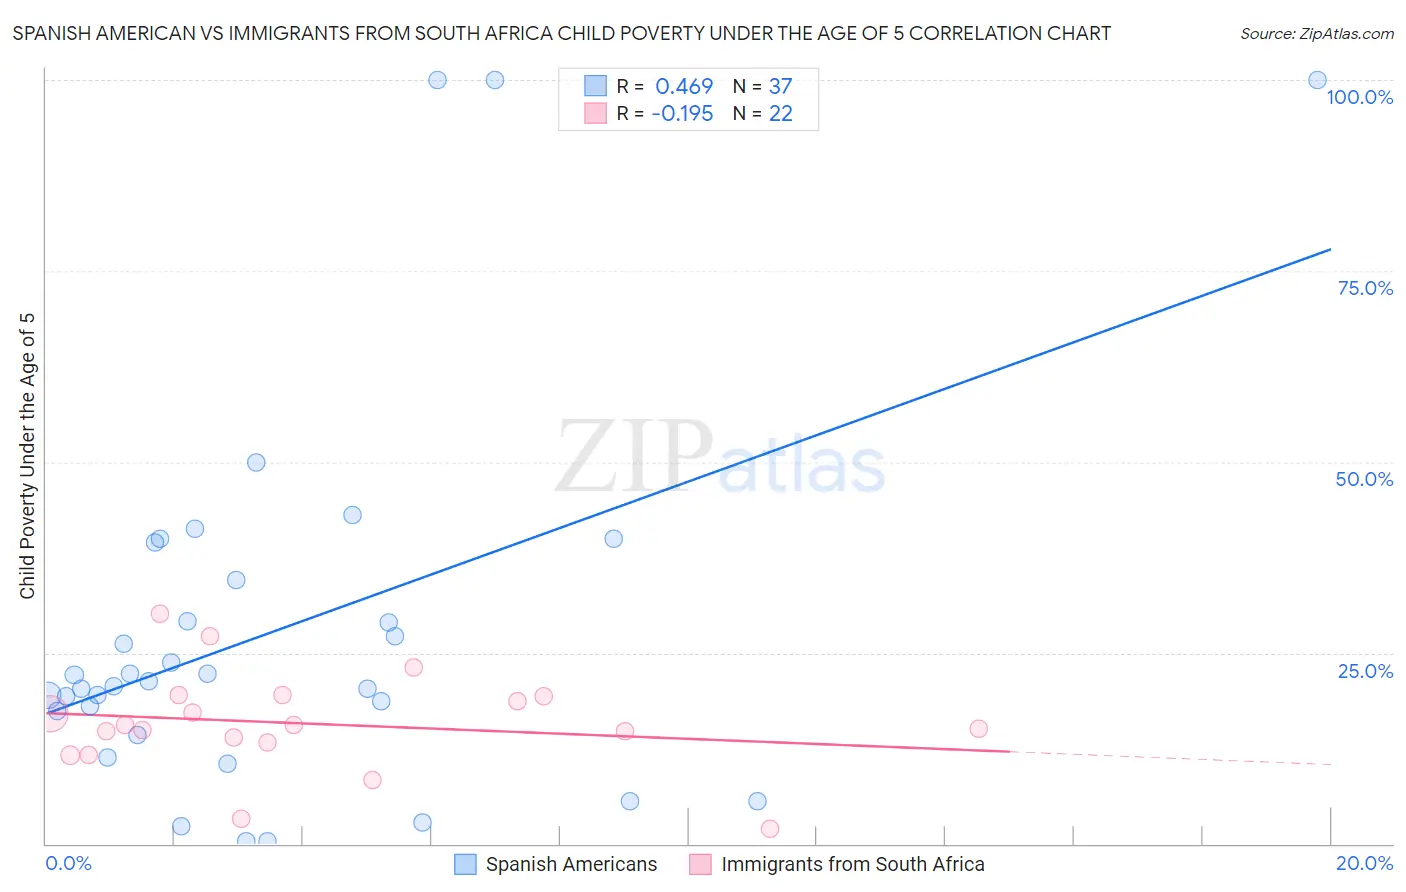 Spanish American vs Immigrants from South Africa Child Poverty Under the Age of 5